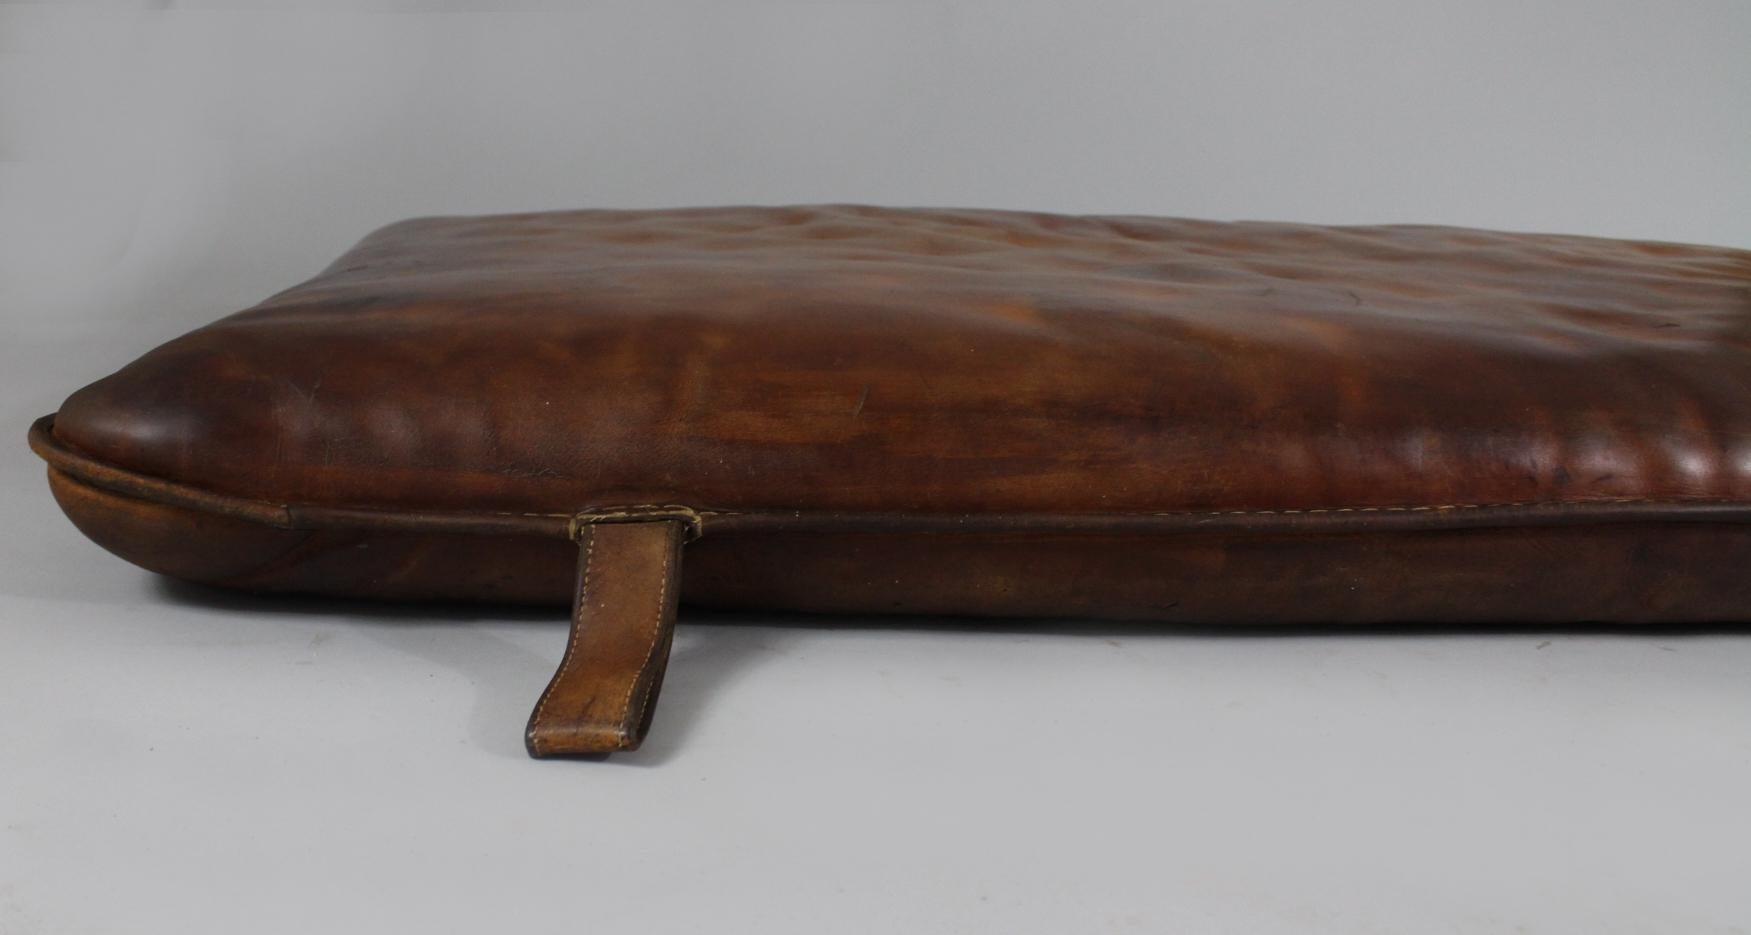 Leather gym mat from the 1930s. It is made from a very thick leather, good condition with patina.